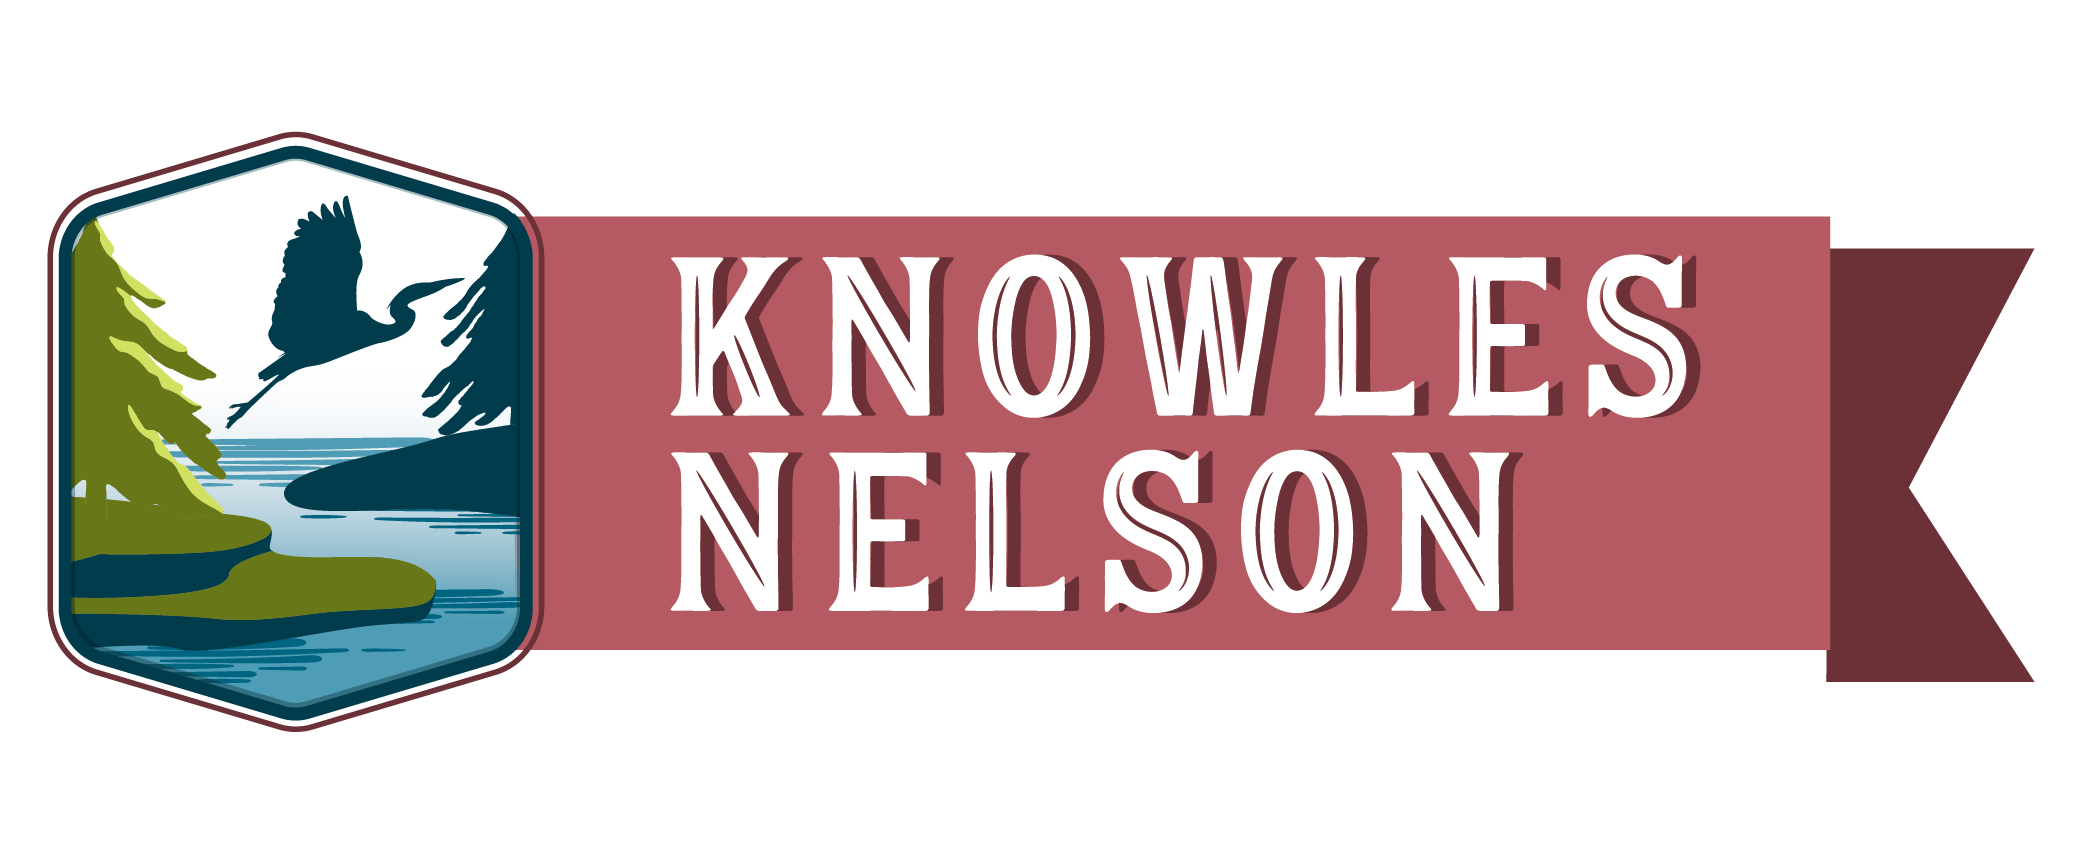 Knowles-Nelson red banner with an image of a bird taking flight on the left.